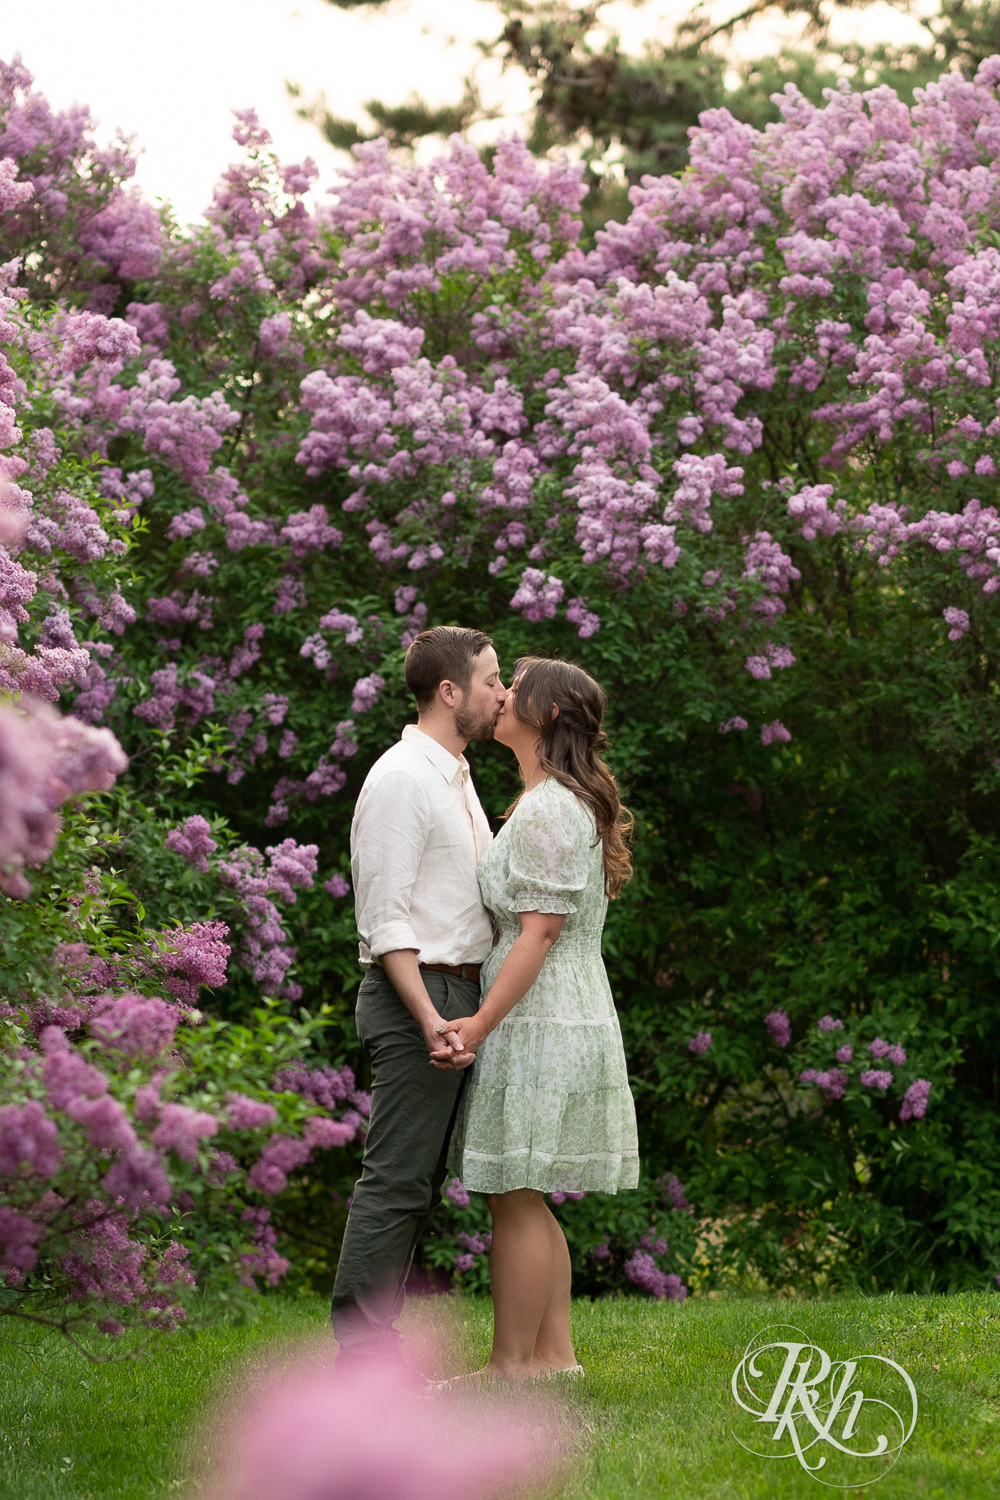 Man in white shirt and woman in green kiss in front of lilacs during engagement photography at the Minnesota Landscape Arboretum in Chaska, Minnesota.